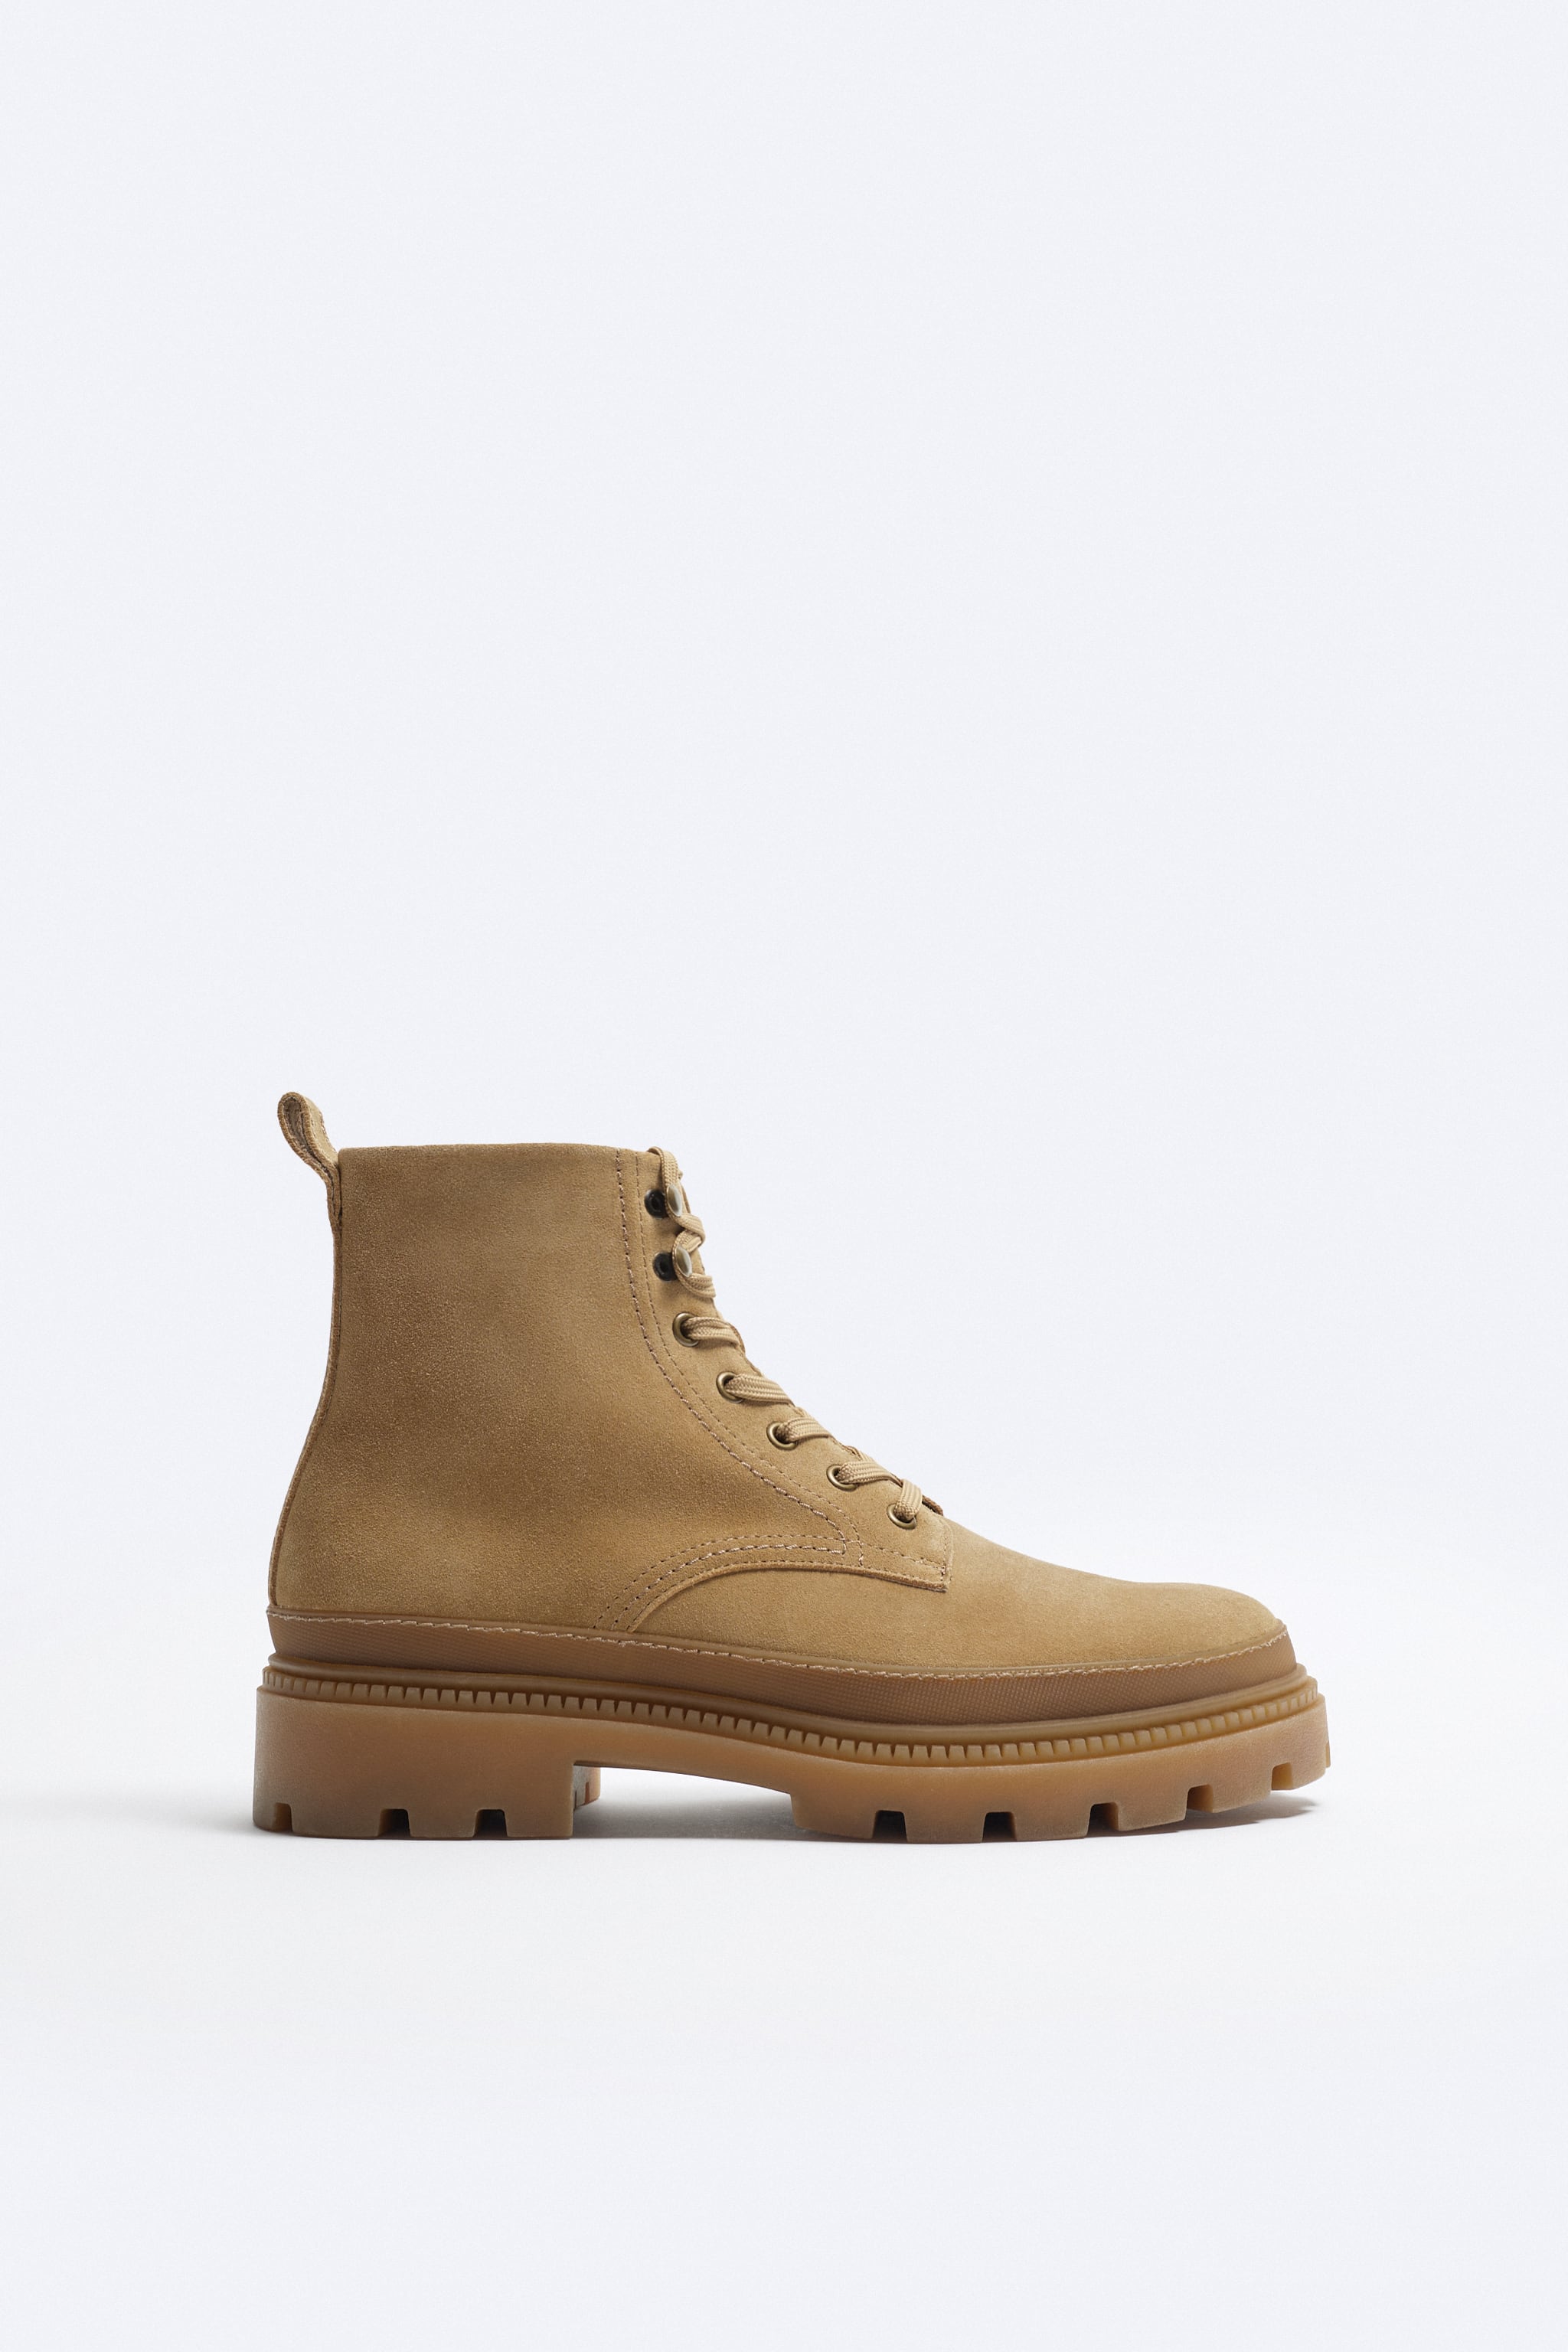 LUG SOLE SUEDE LACE-UP BOOTS